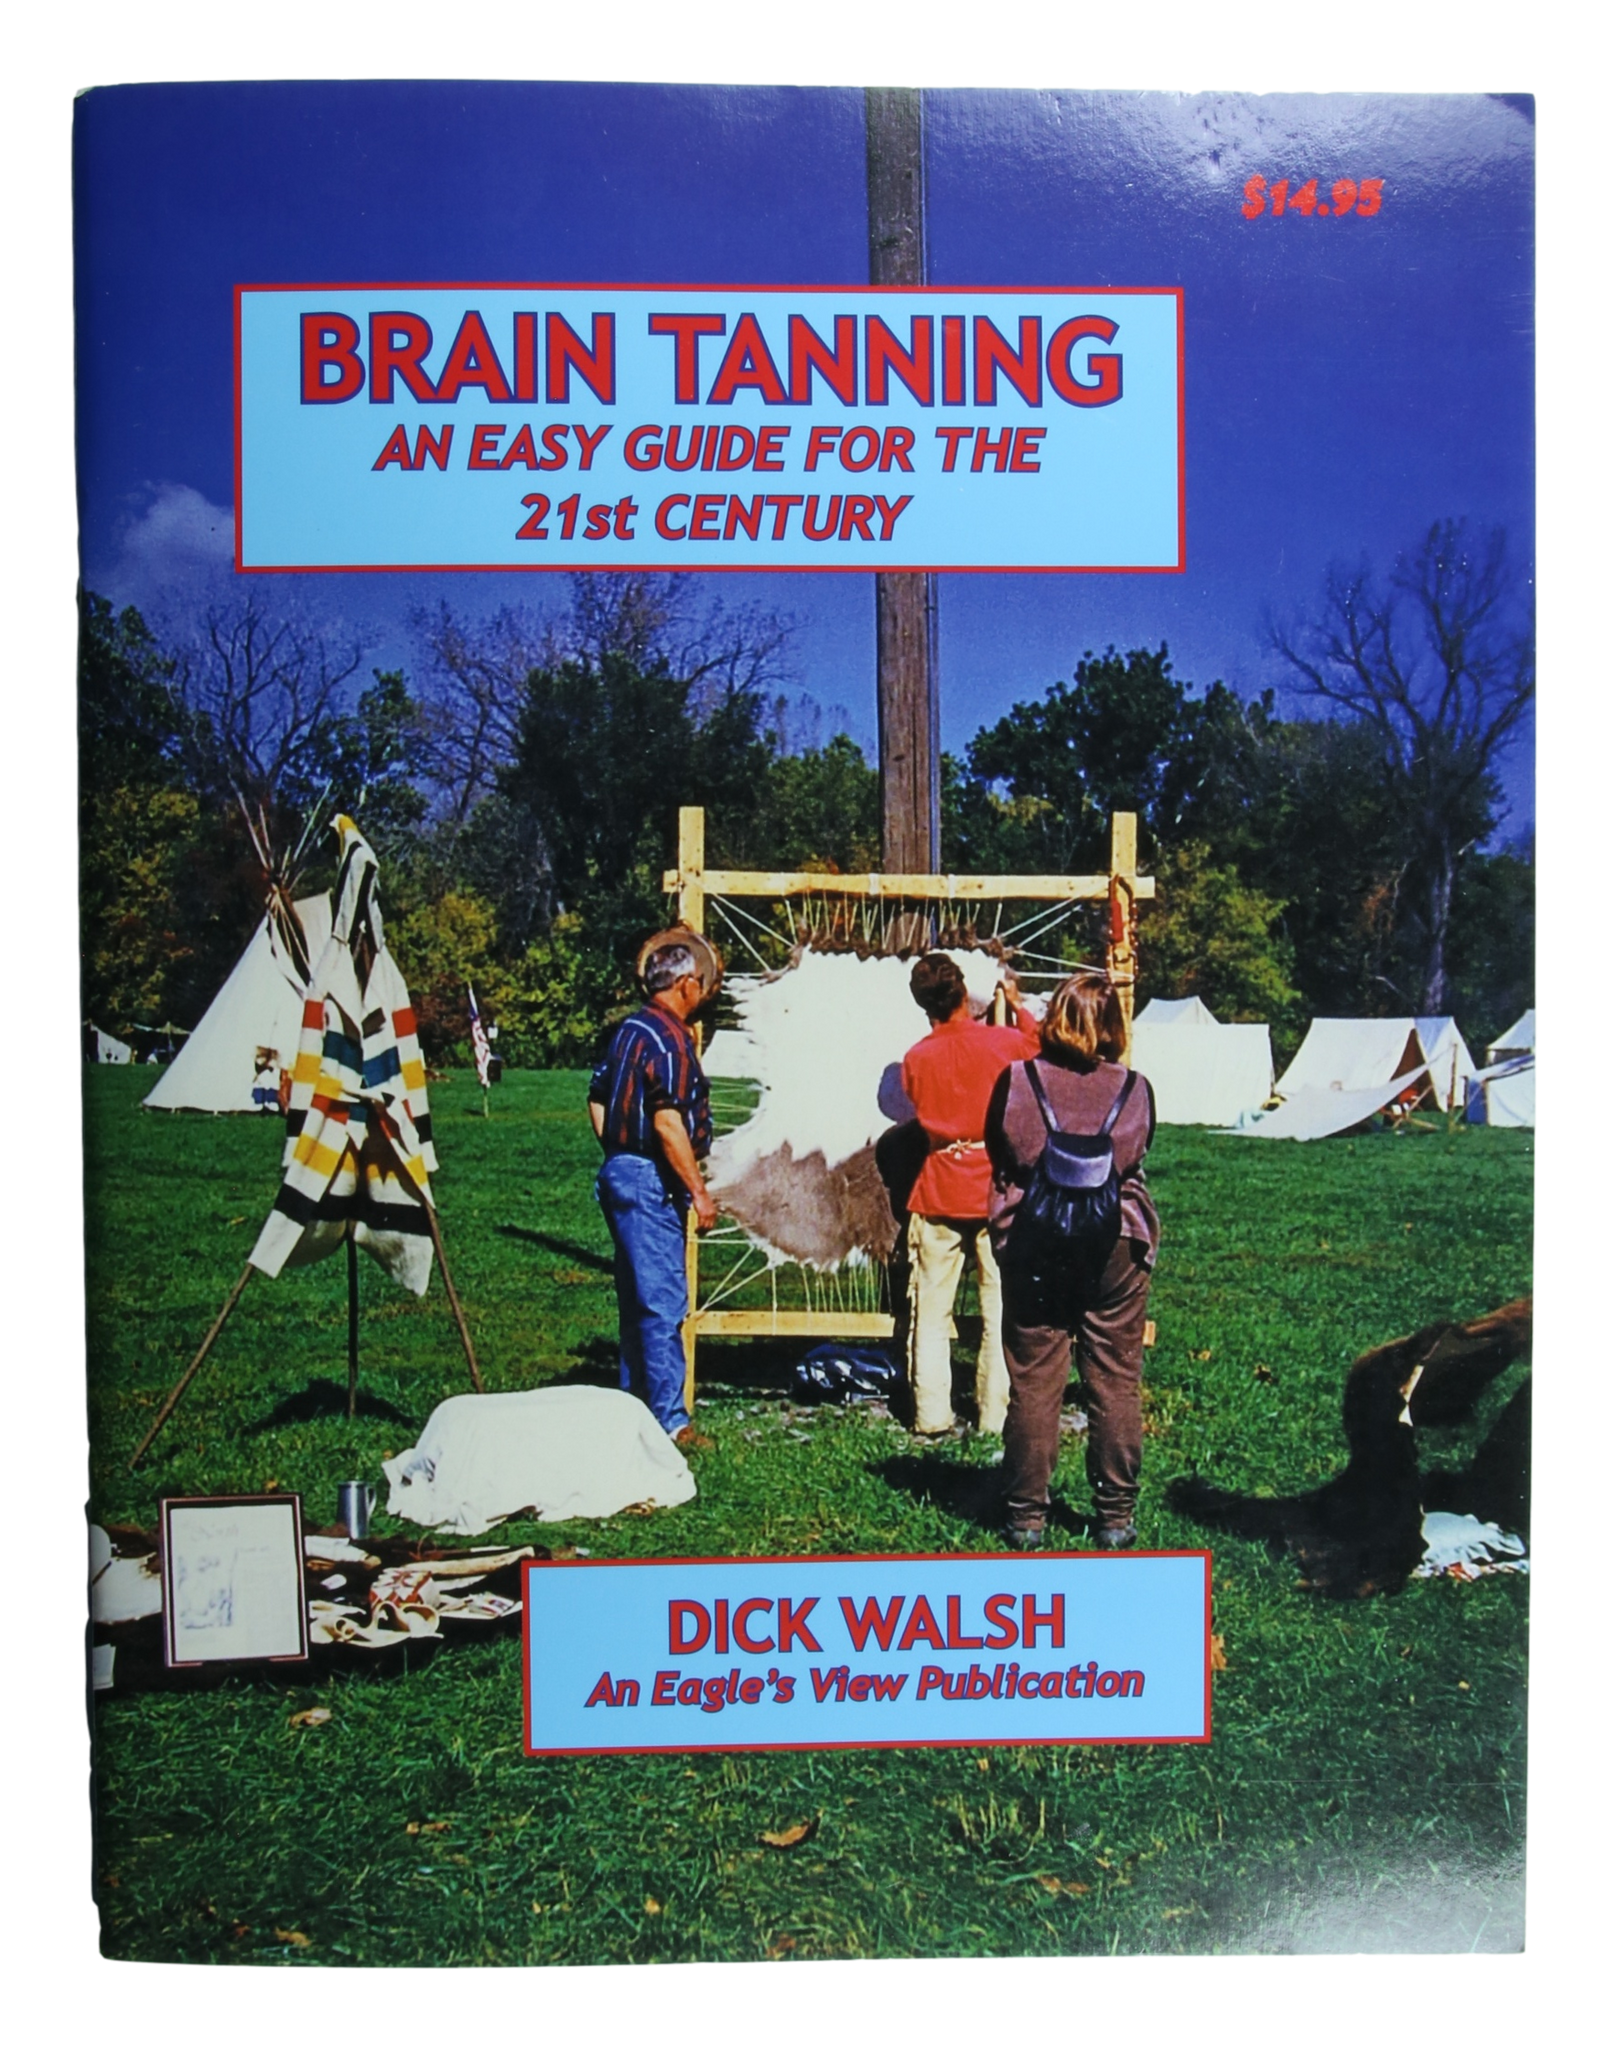 Brain Tanning - An Easy Guide for the 21st Century